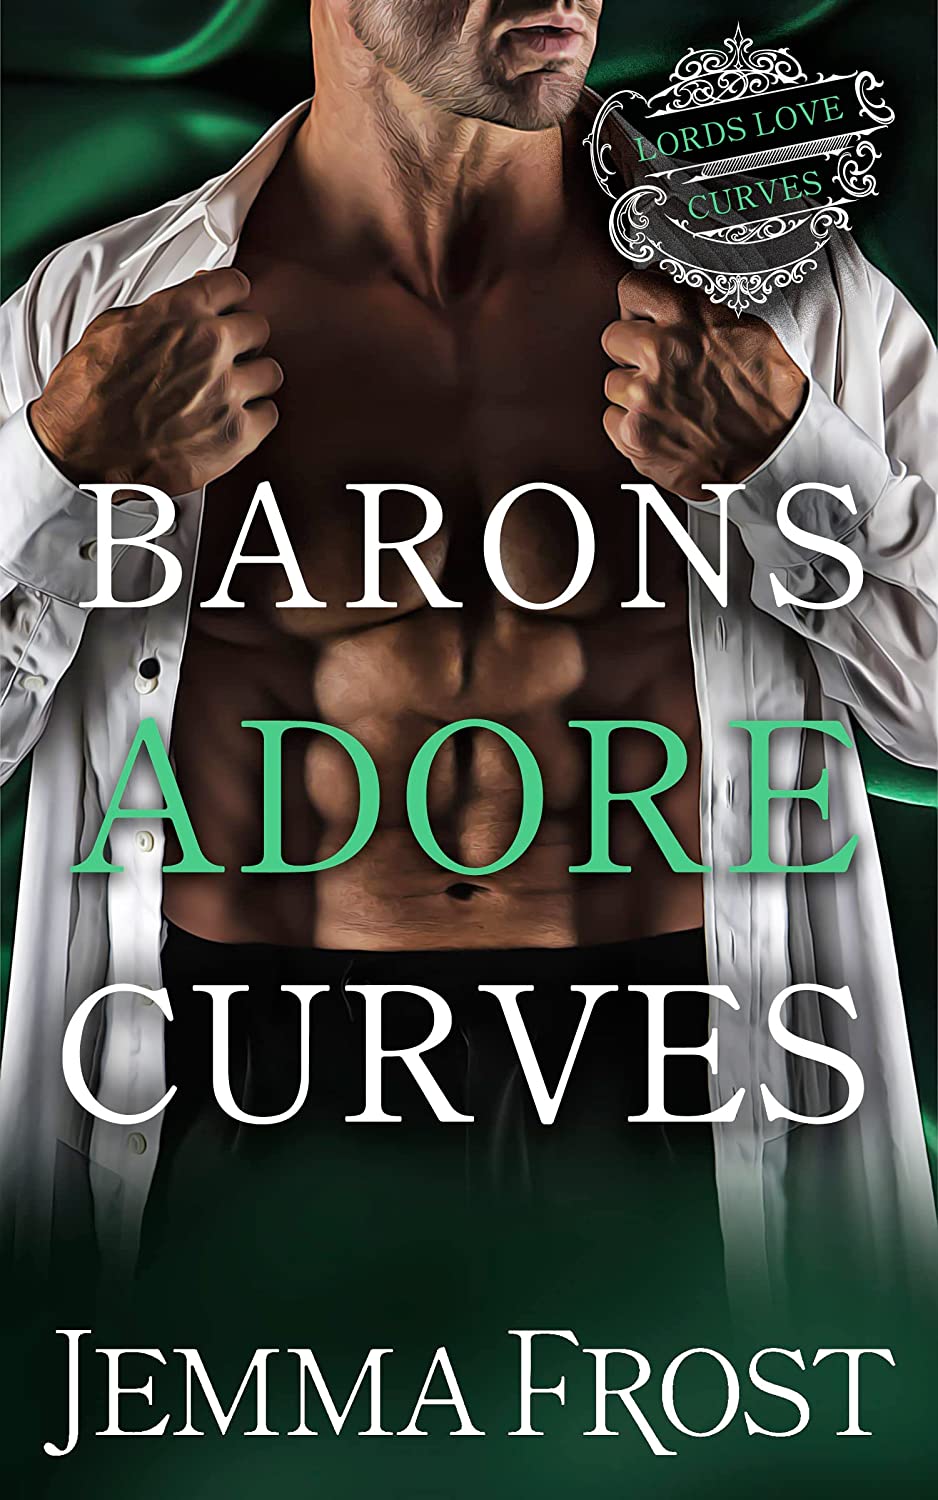 Barons Adore Curves by Jemma Frost PDF Download Audio Book